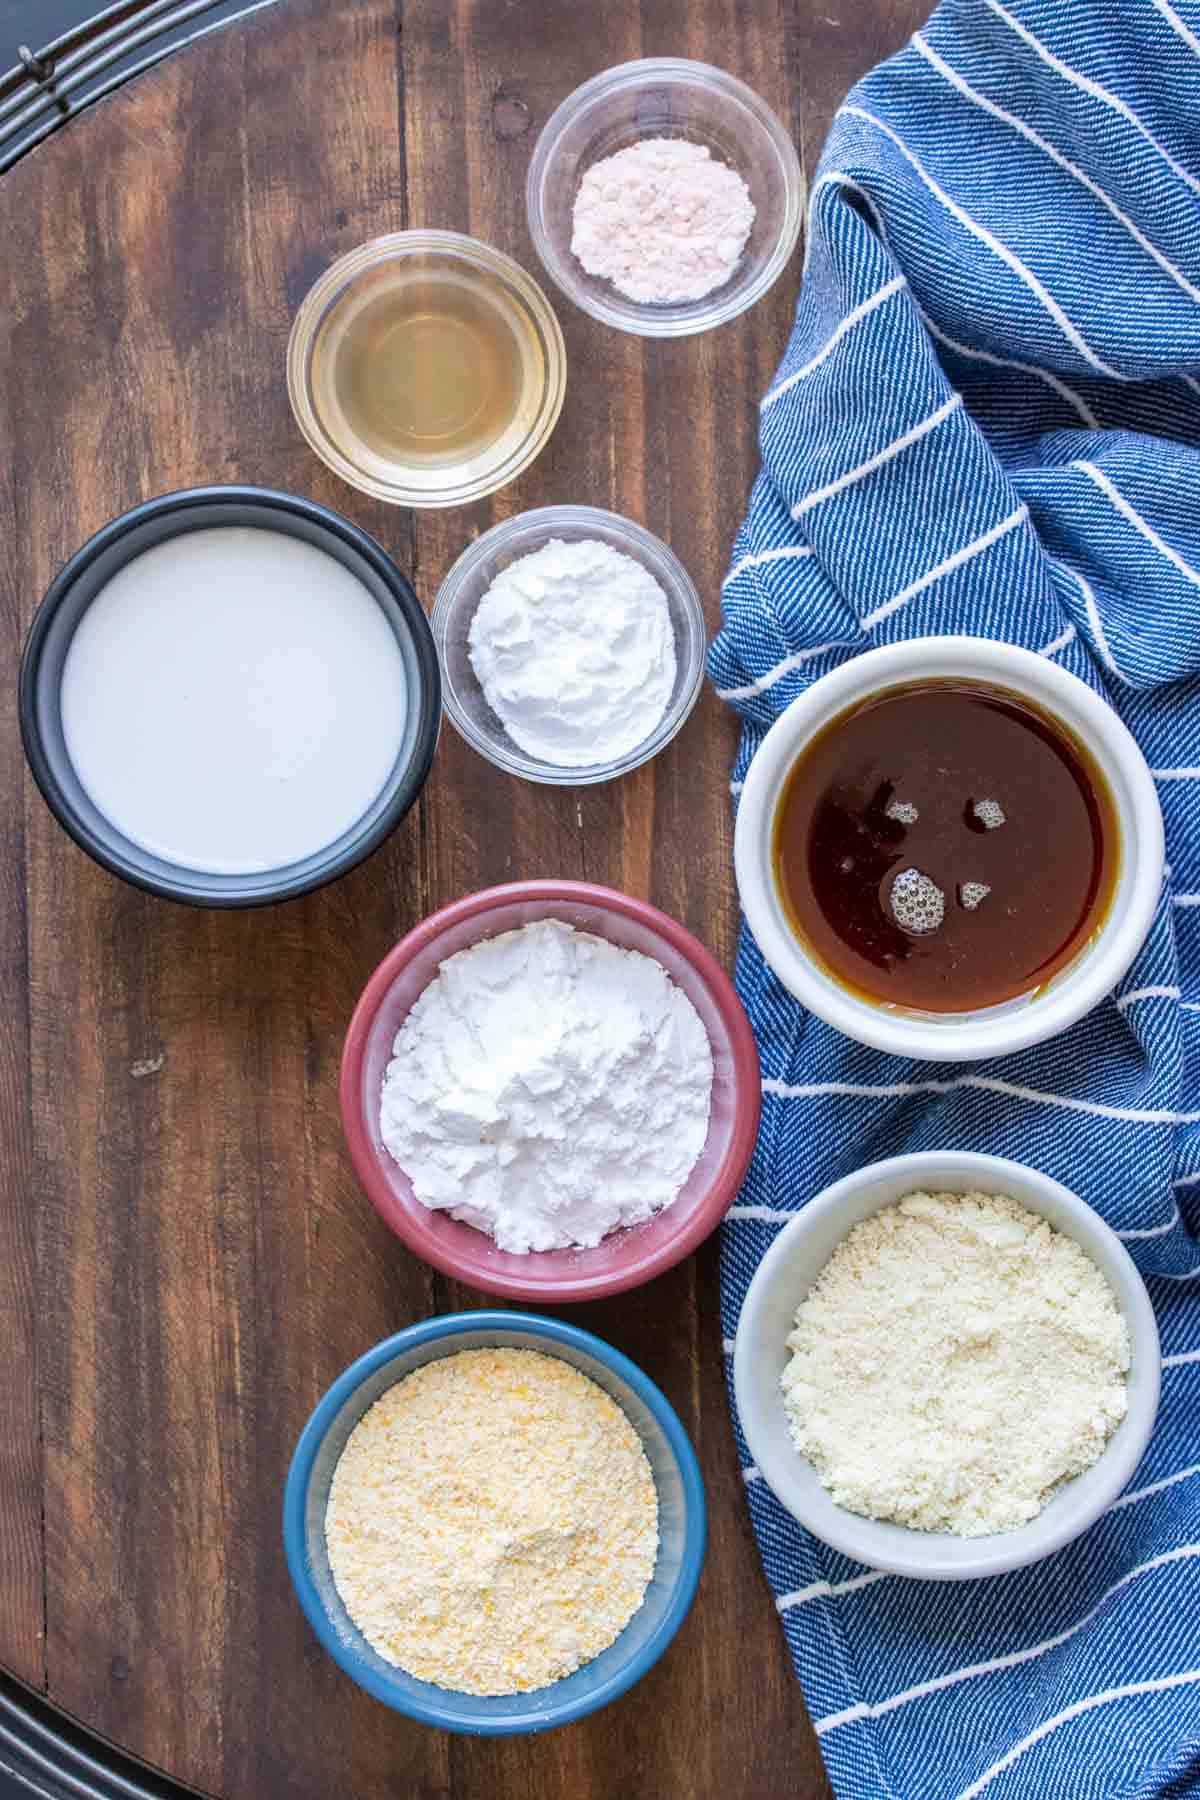 Ingredients needed to make cornbread muffins in different colored bowls next to a blue towel